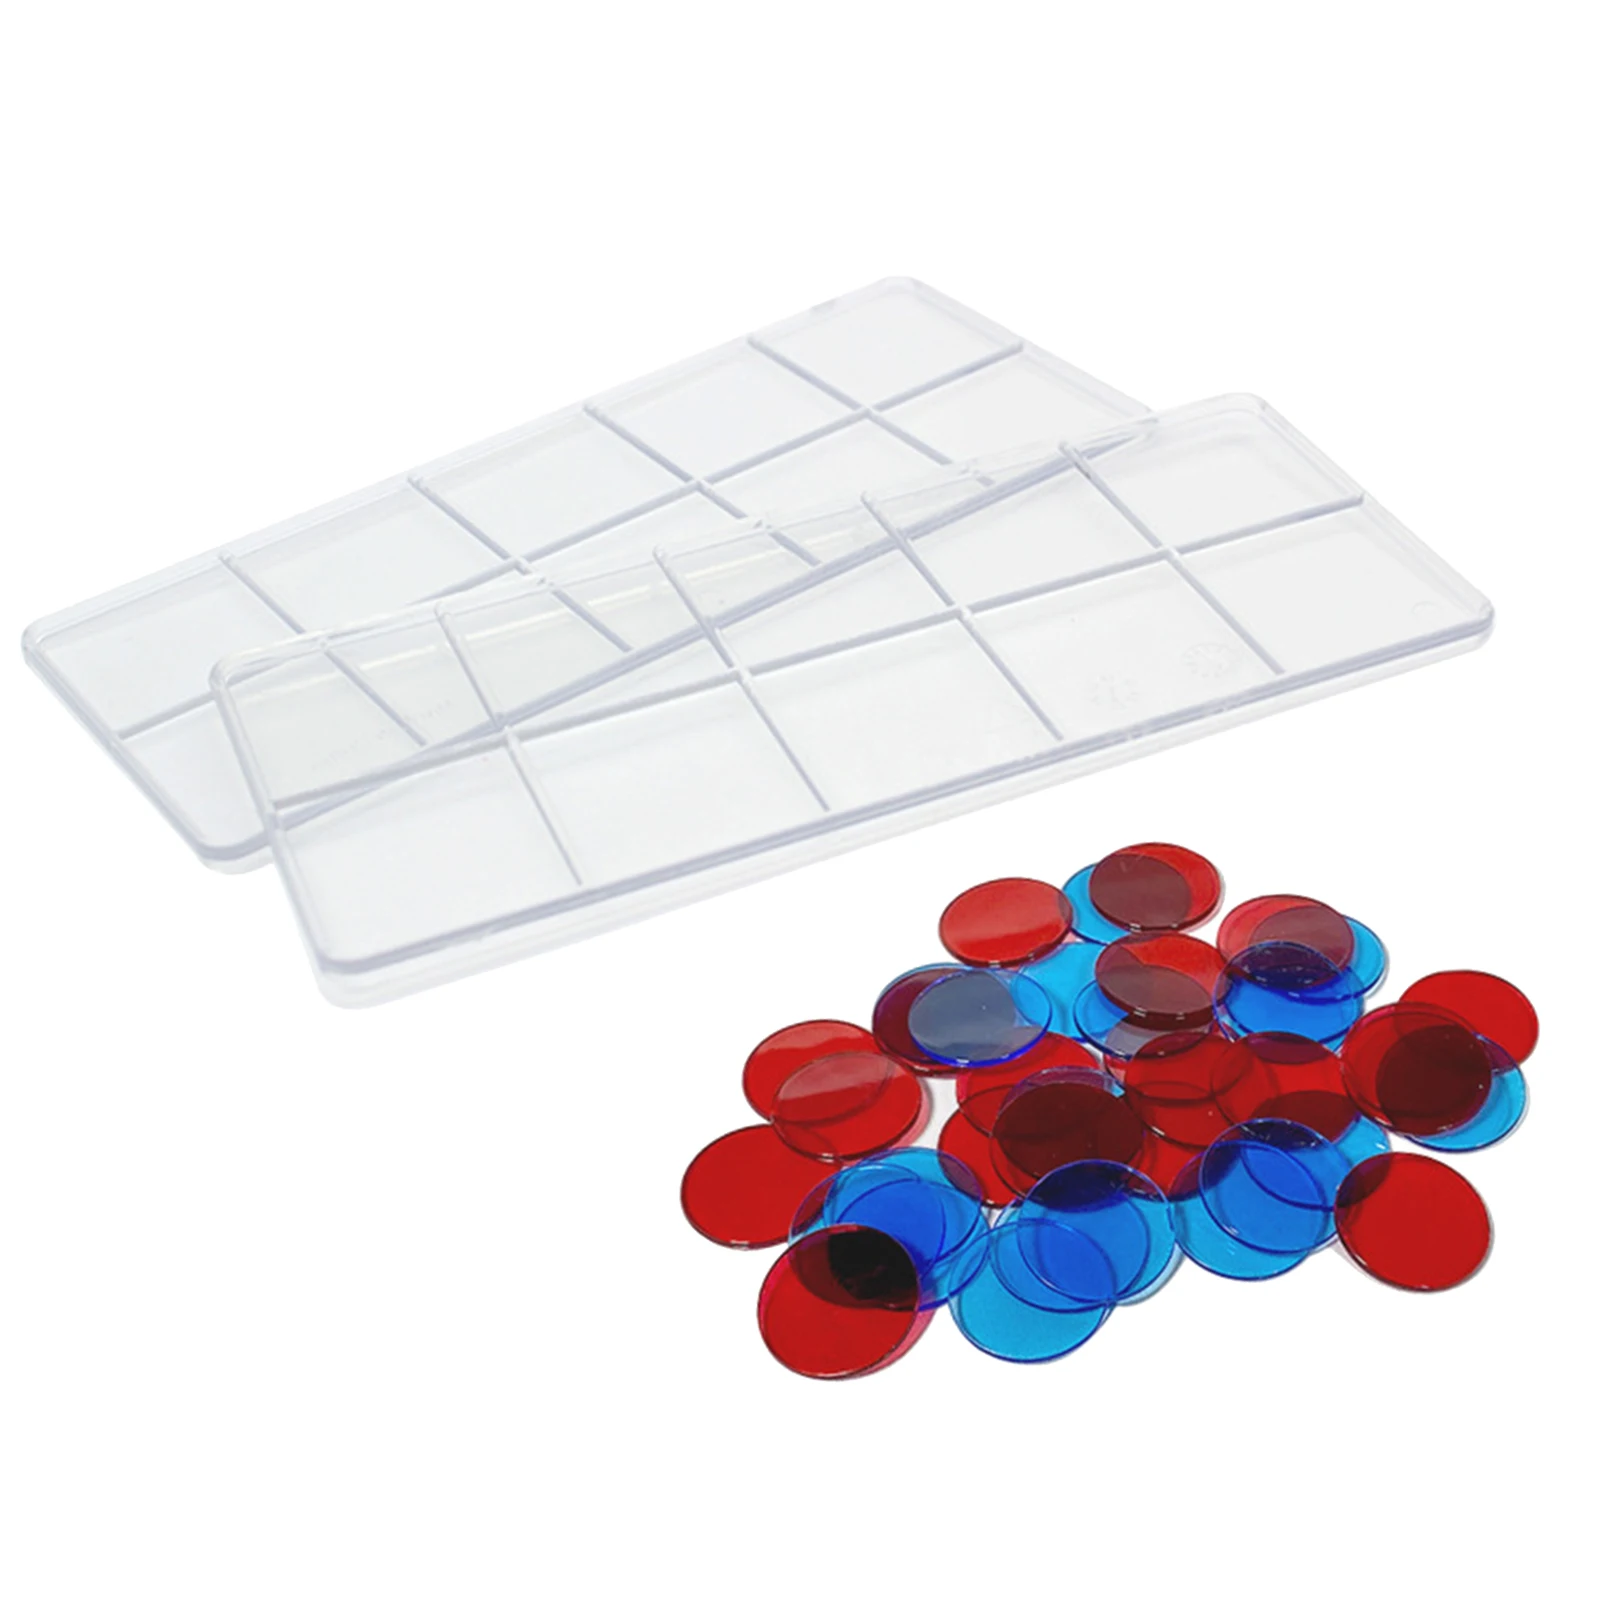 Ten Frames Set Learning Manipulative for Early Math 2 Frames with 40 Disks Teach Number Concepts, Addition and Subtraction